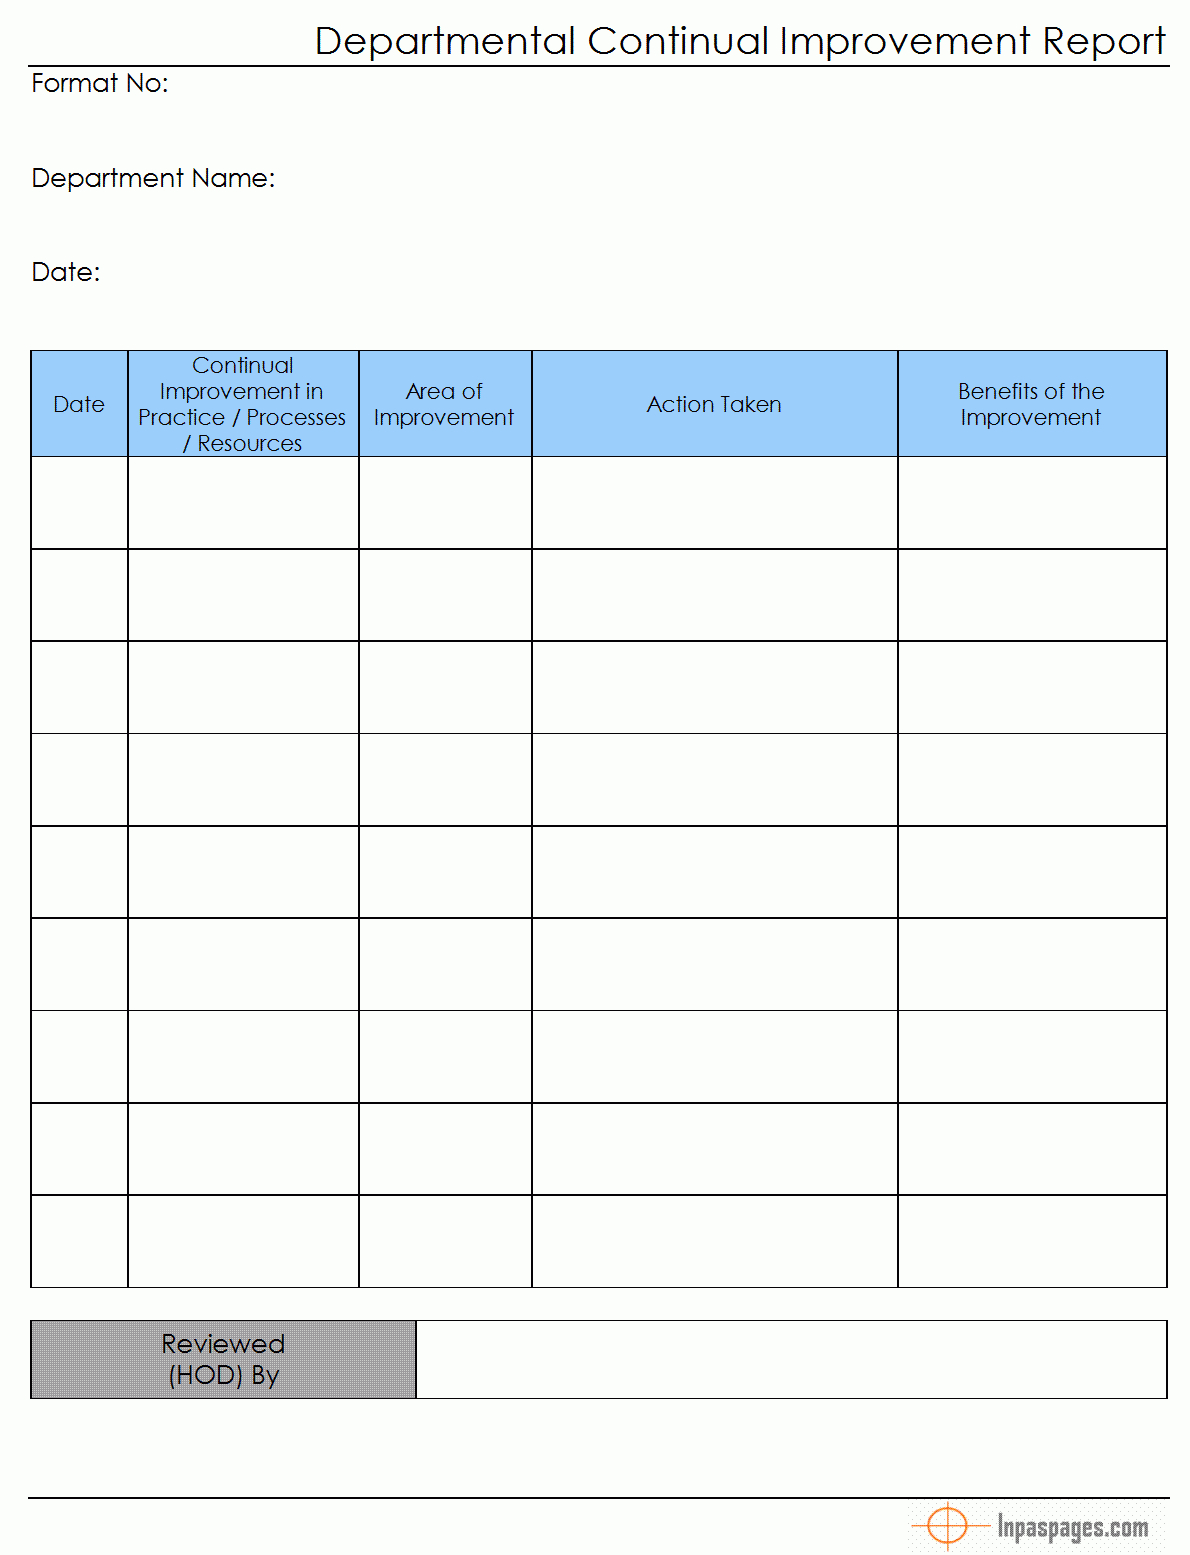 Continual Improvement Report (Departmental) - Intended For Improvement Report Template